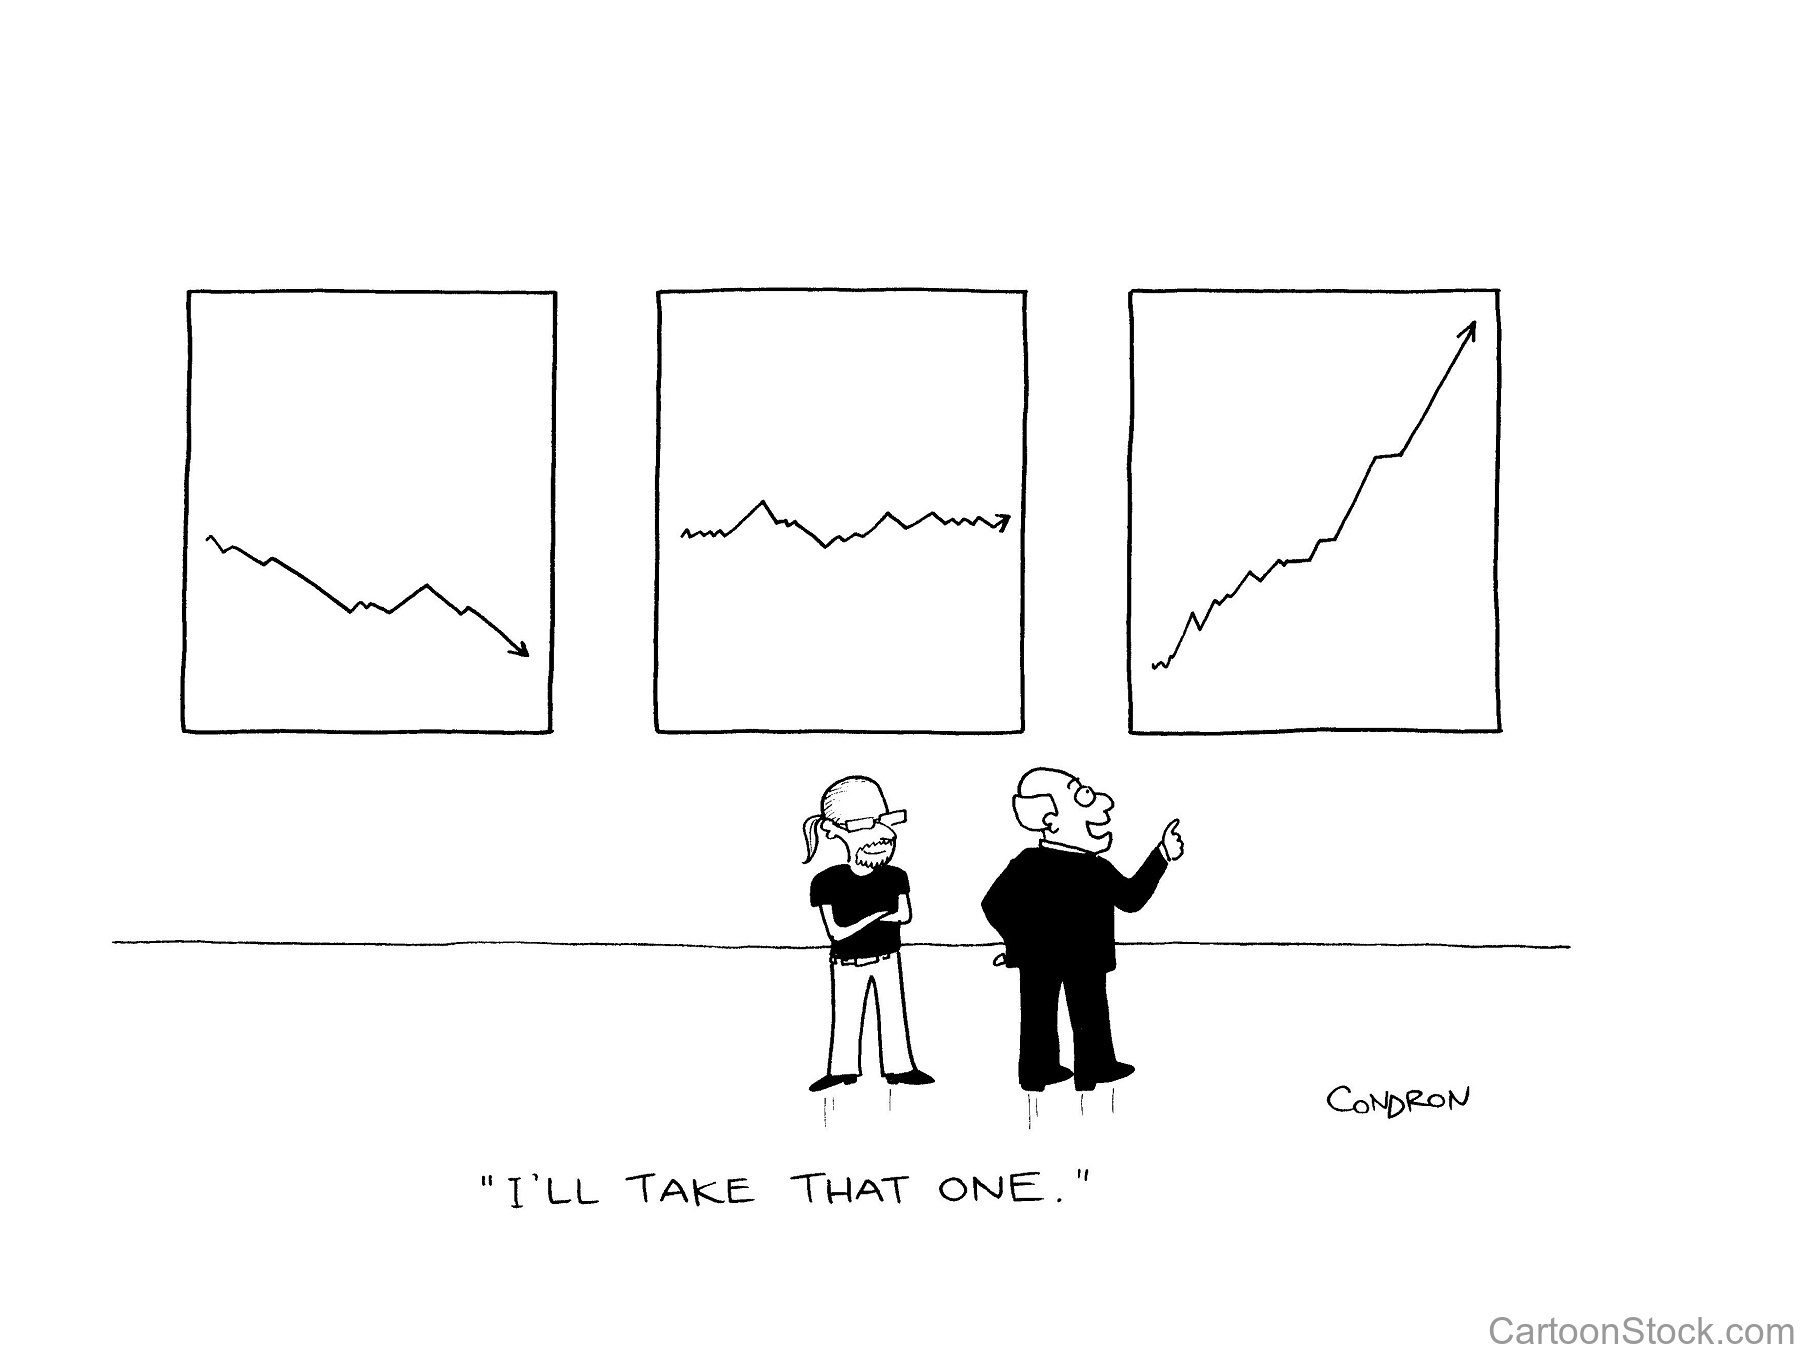 CartoonStock. ''I'll take that one.'' by Todd Condron